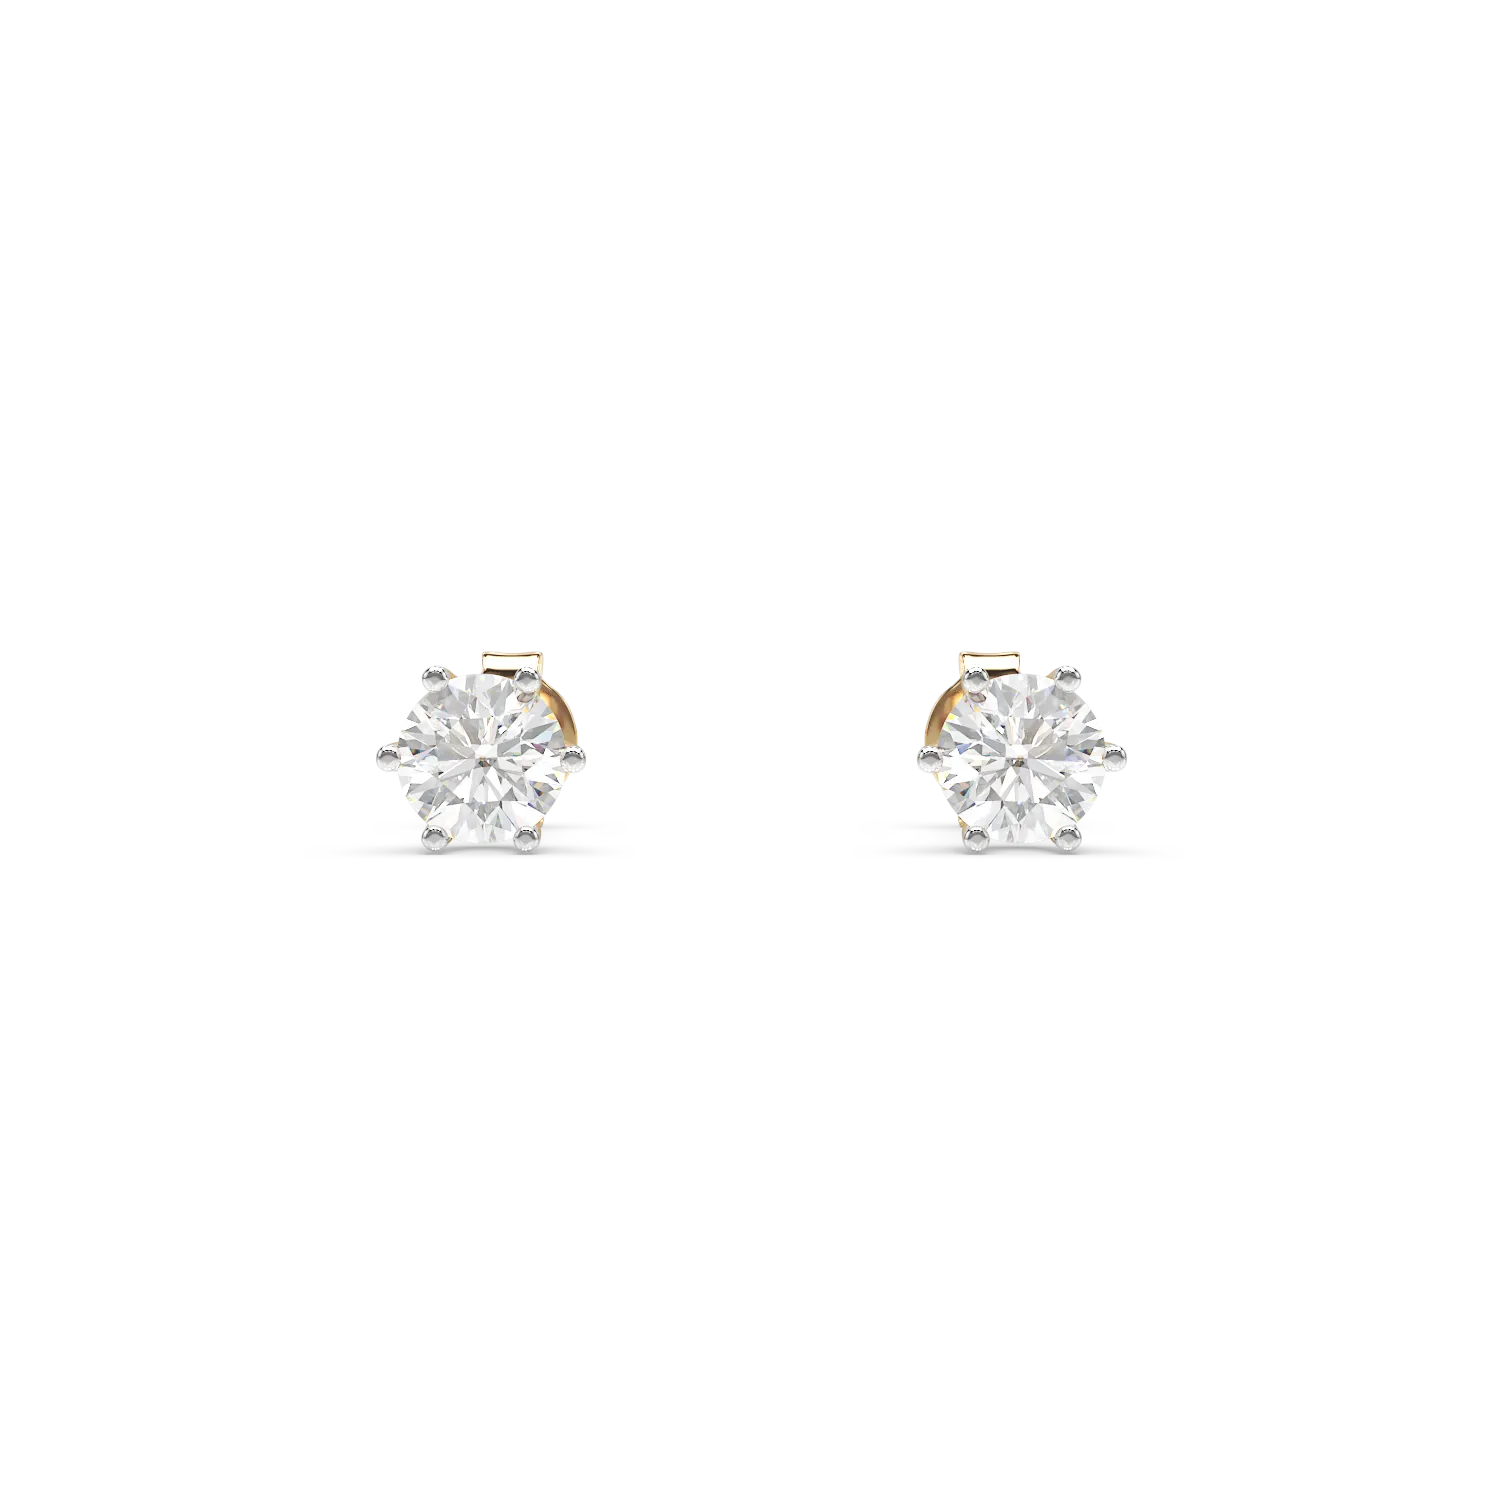 Yellow gold earrings with 0.4ct solitaire diamonds